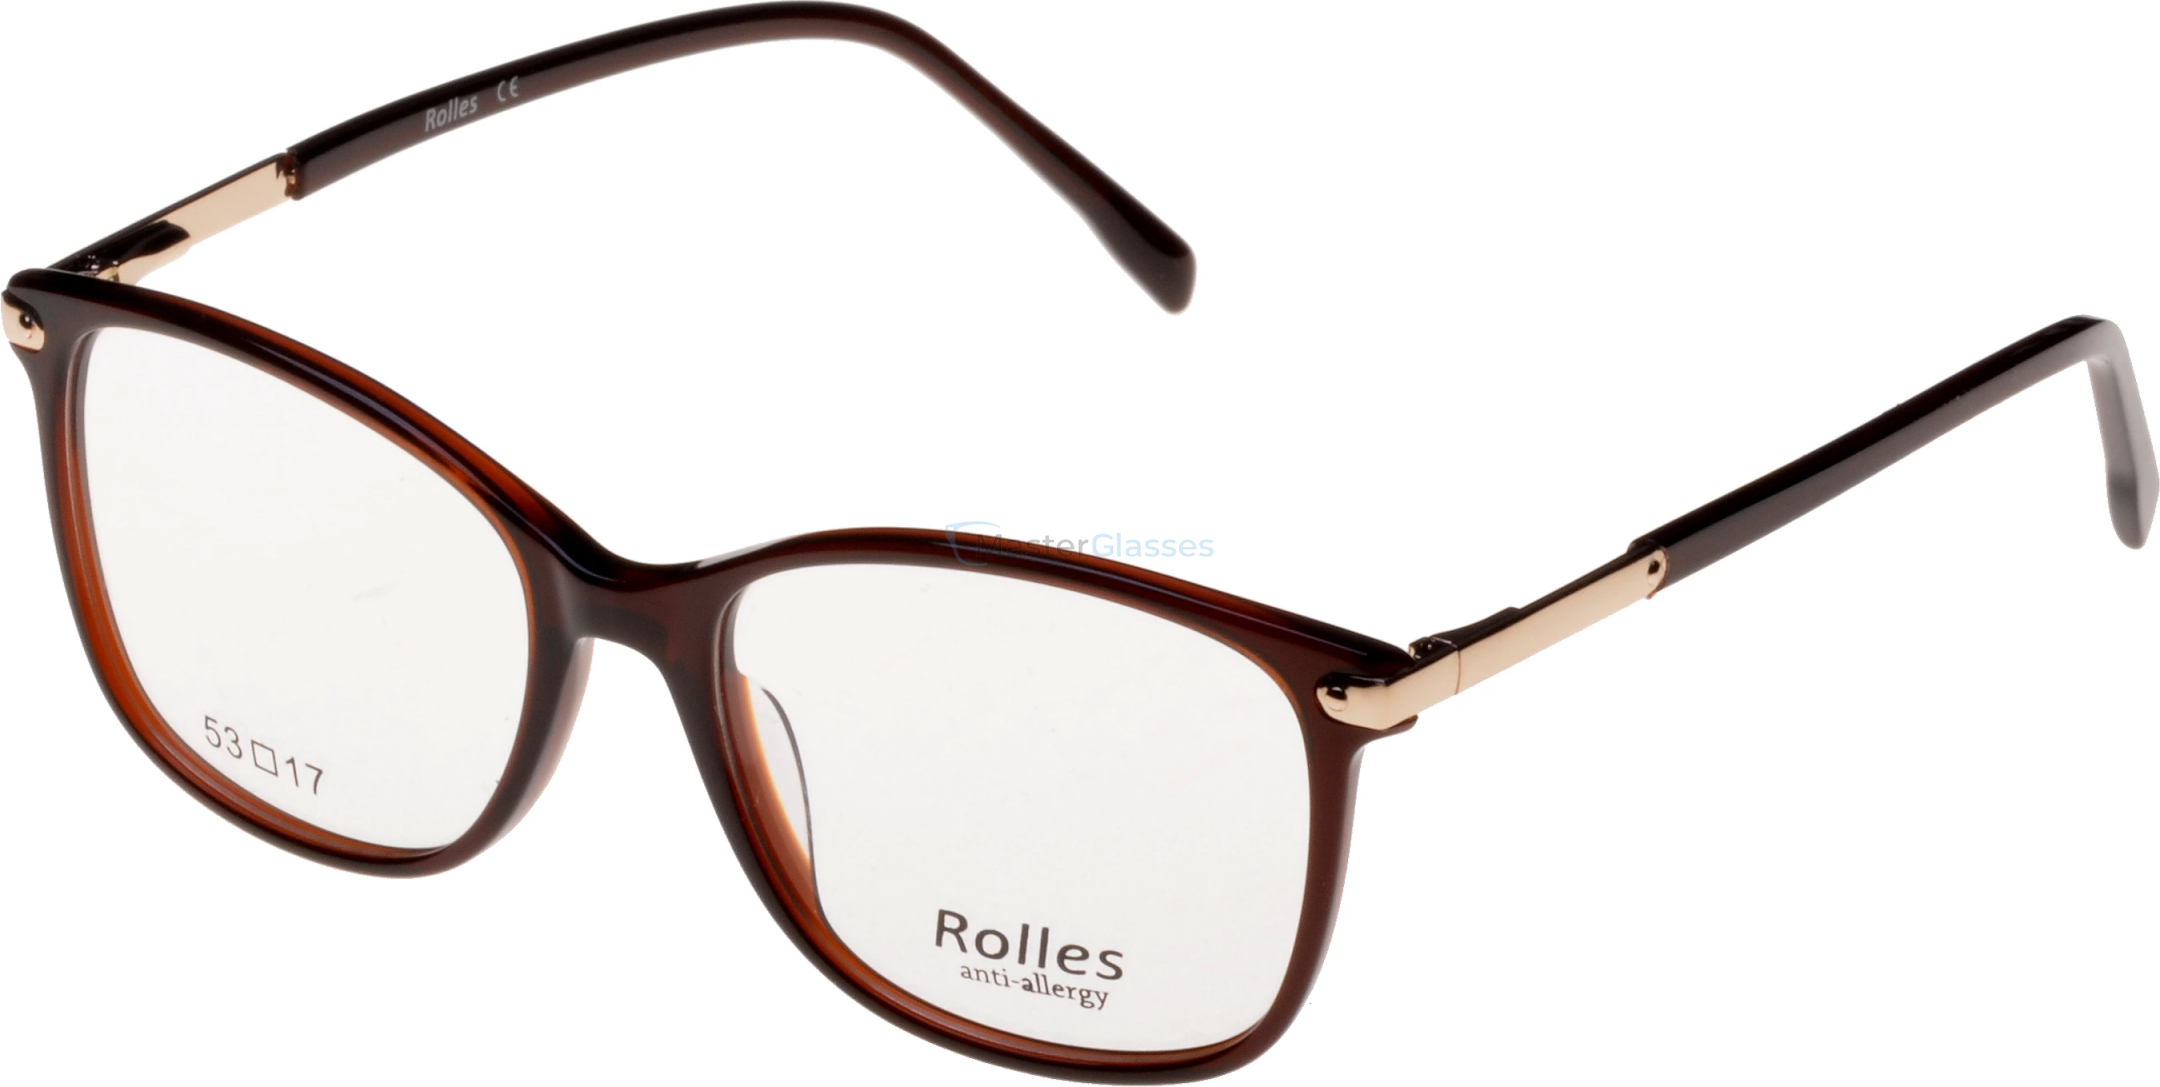  Rolles 528 03